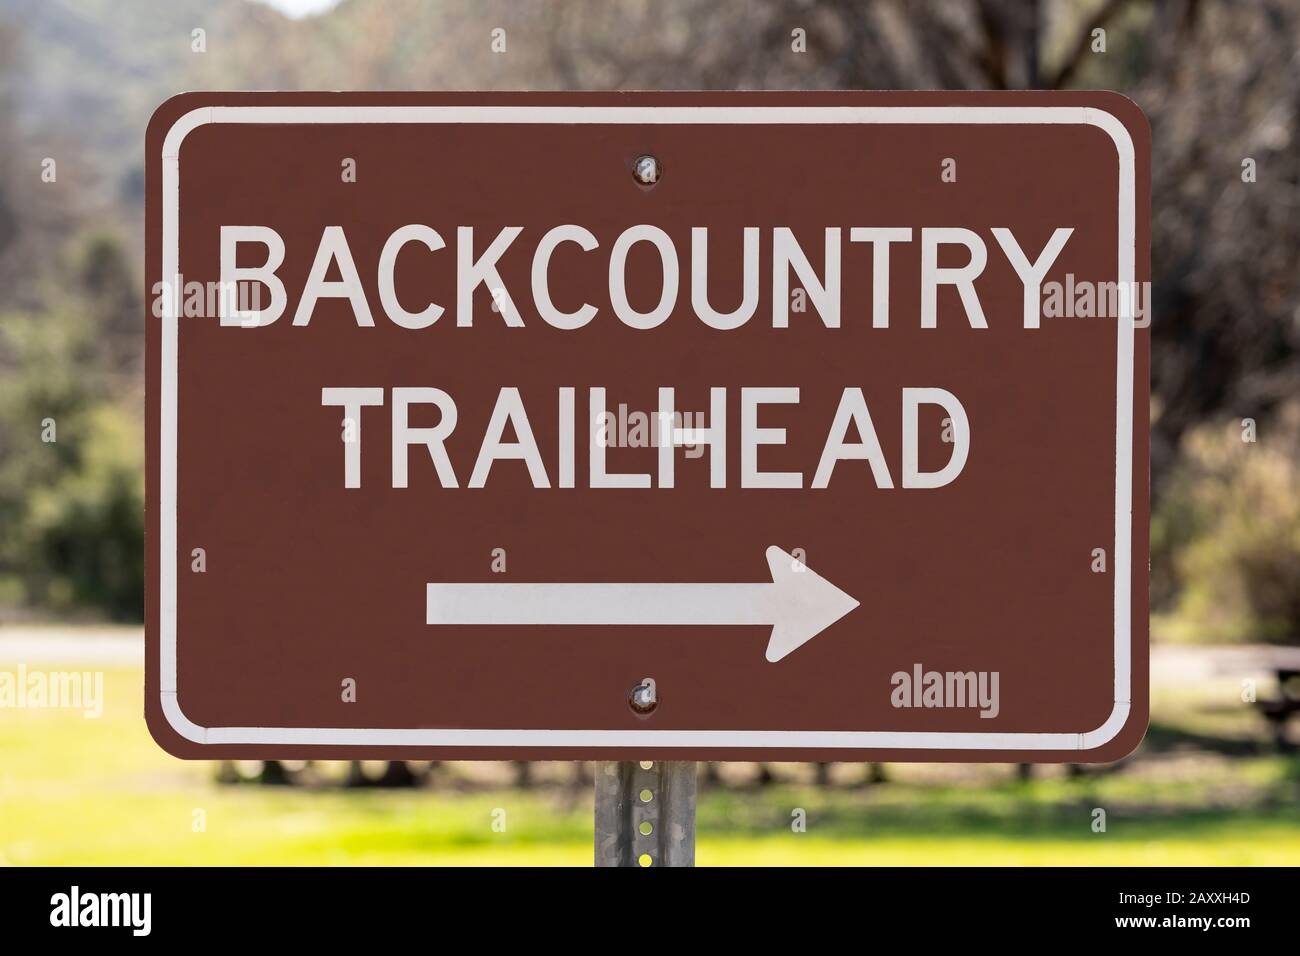 Backcountry trailhead sign pointing towards hiking trail in wilderness nature park. Stock Photo